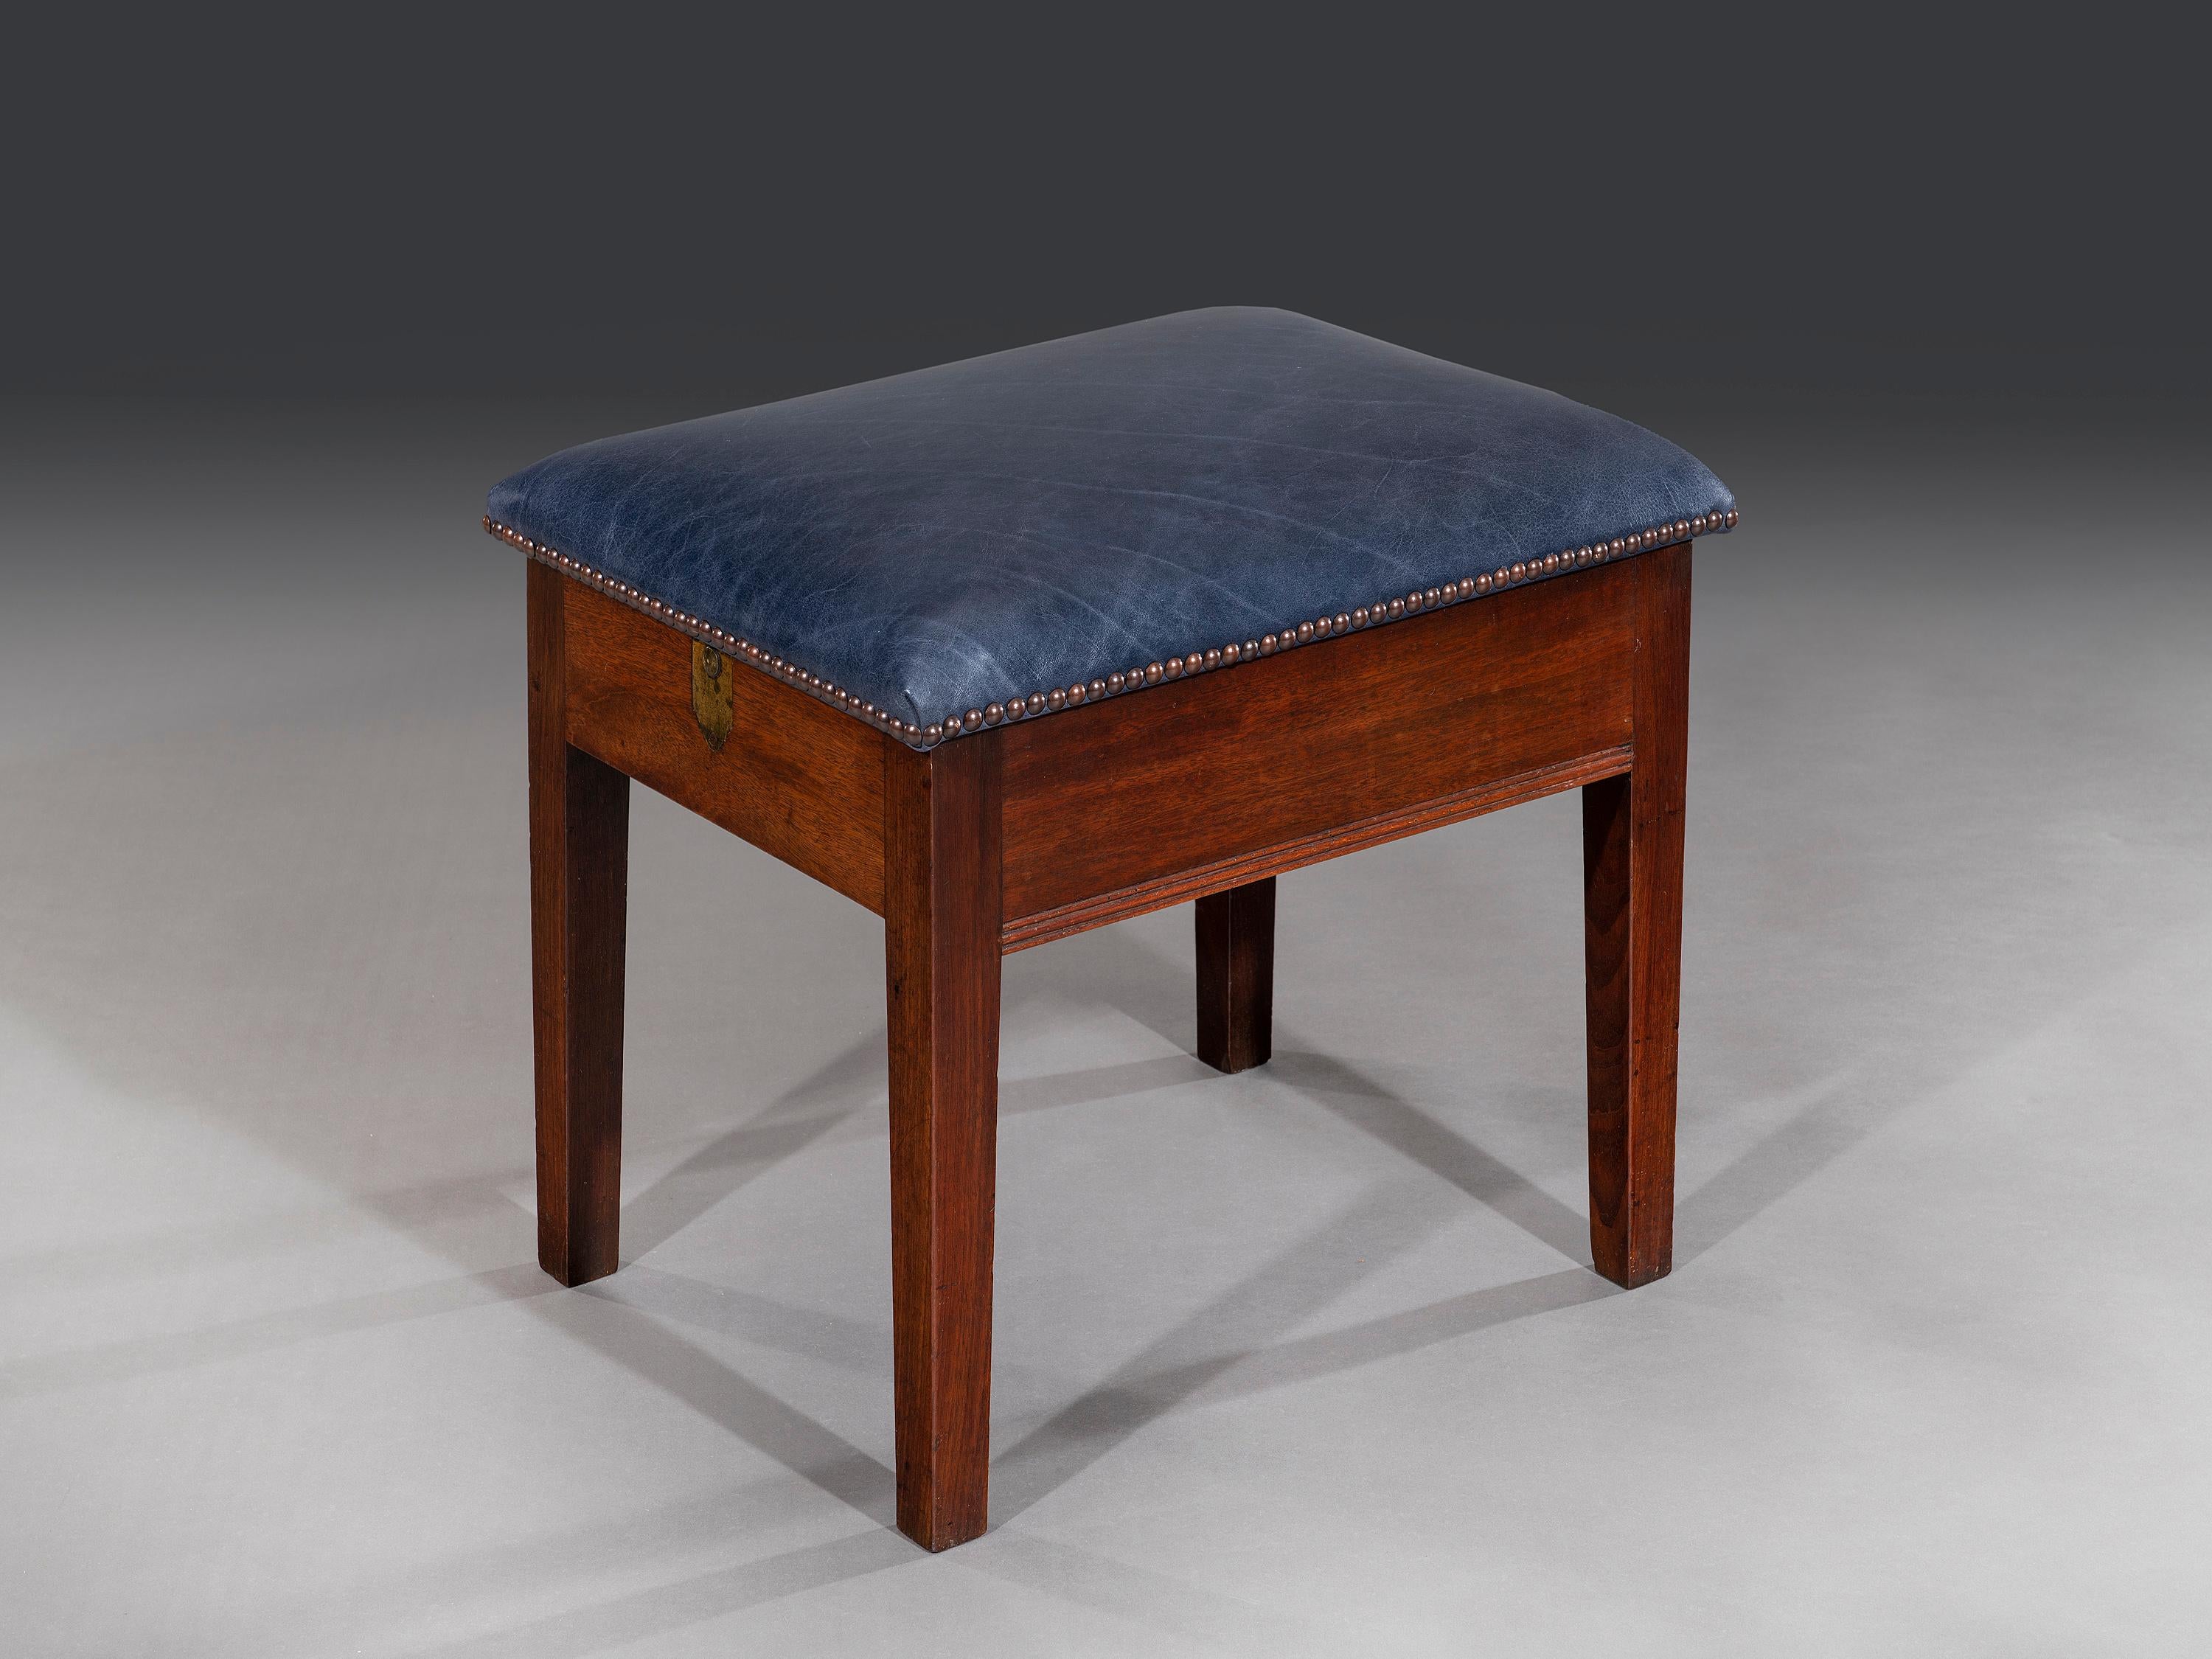 The unusual set of 18th century metamorphic library steps is concealed in the form of a library stool. The recently upholstered hinged seat has been re-covered in blue leather hide and opens when the brass button is pressed to release the catch. The